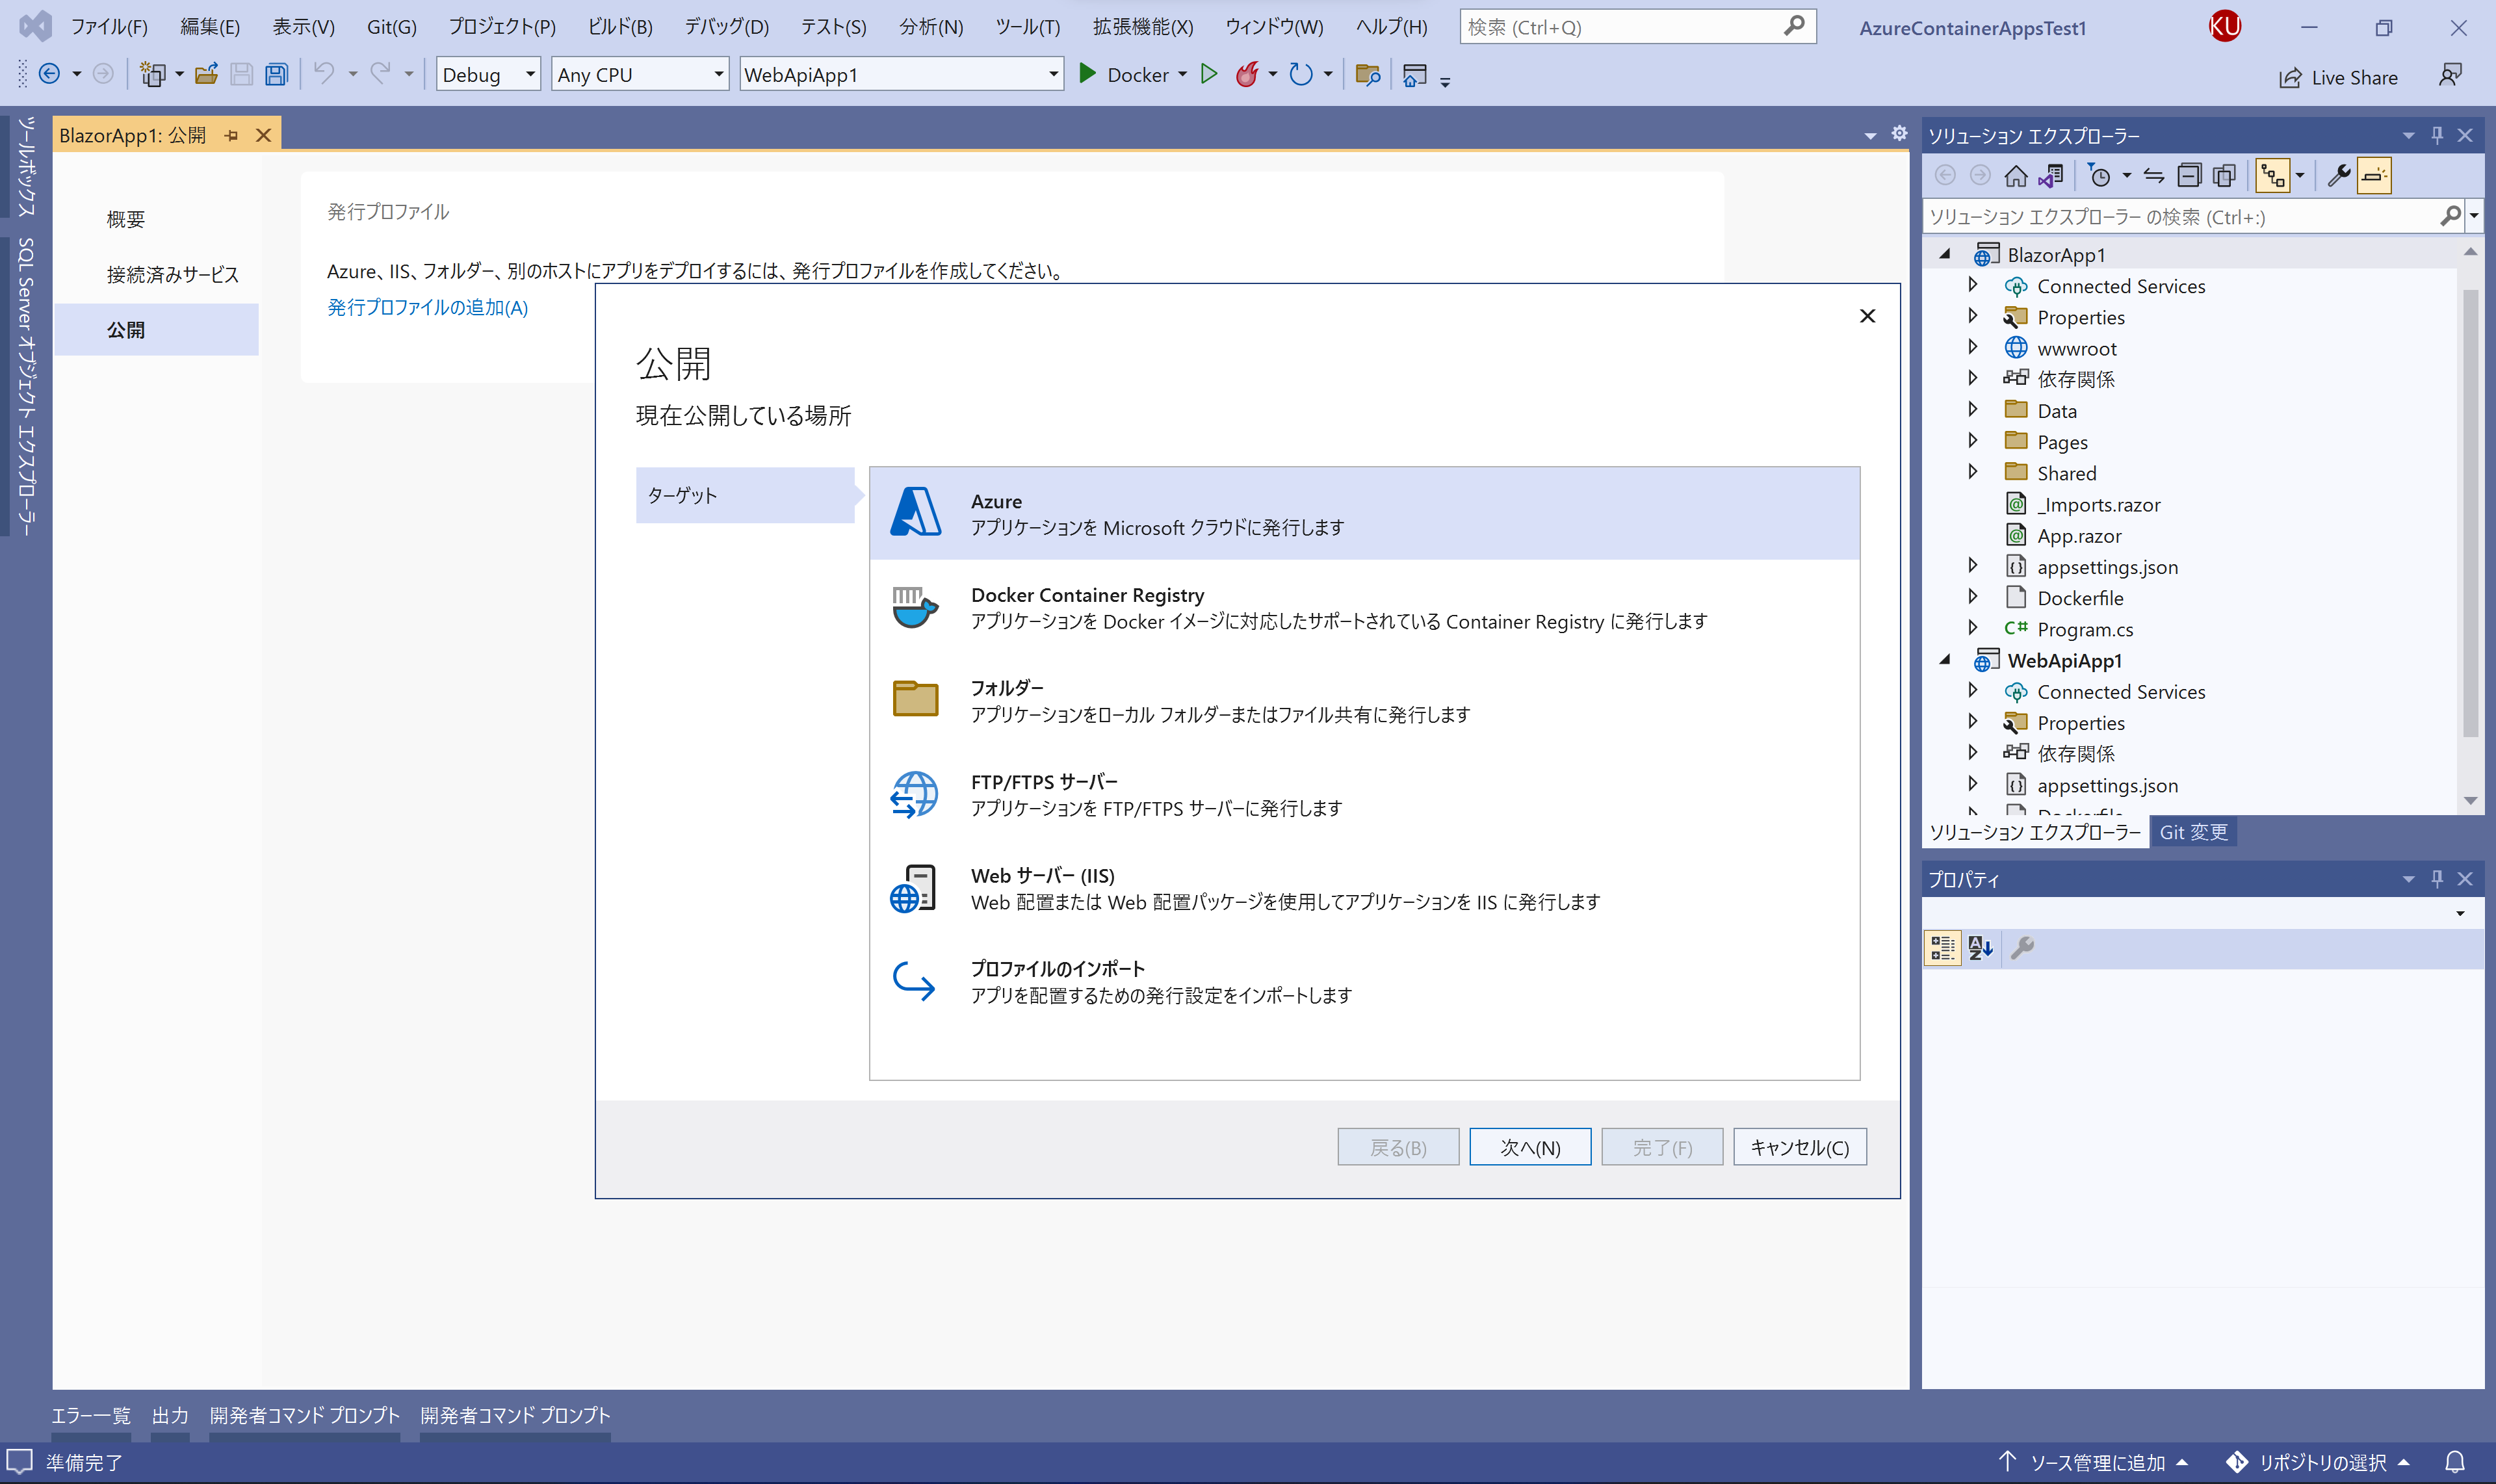 Azure Container Appsへデプロイ